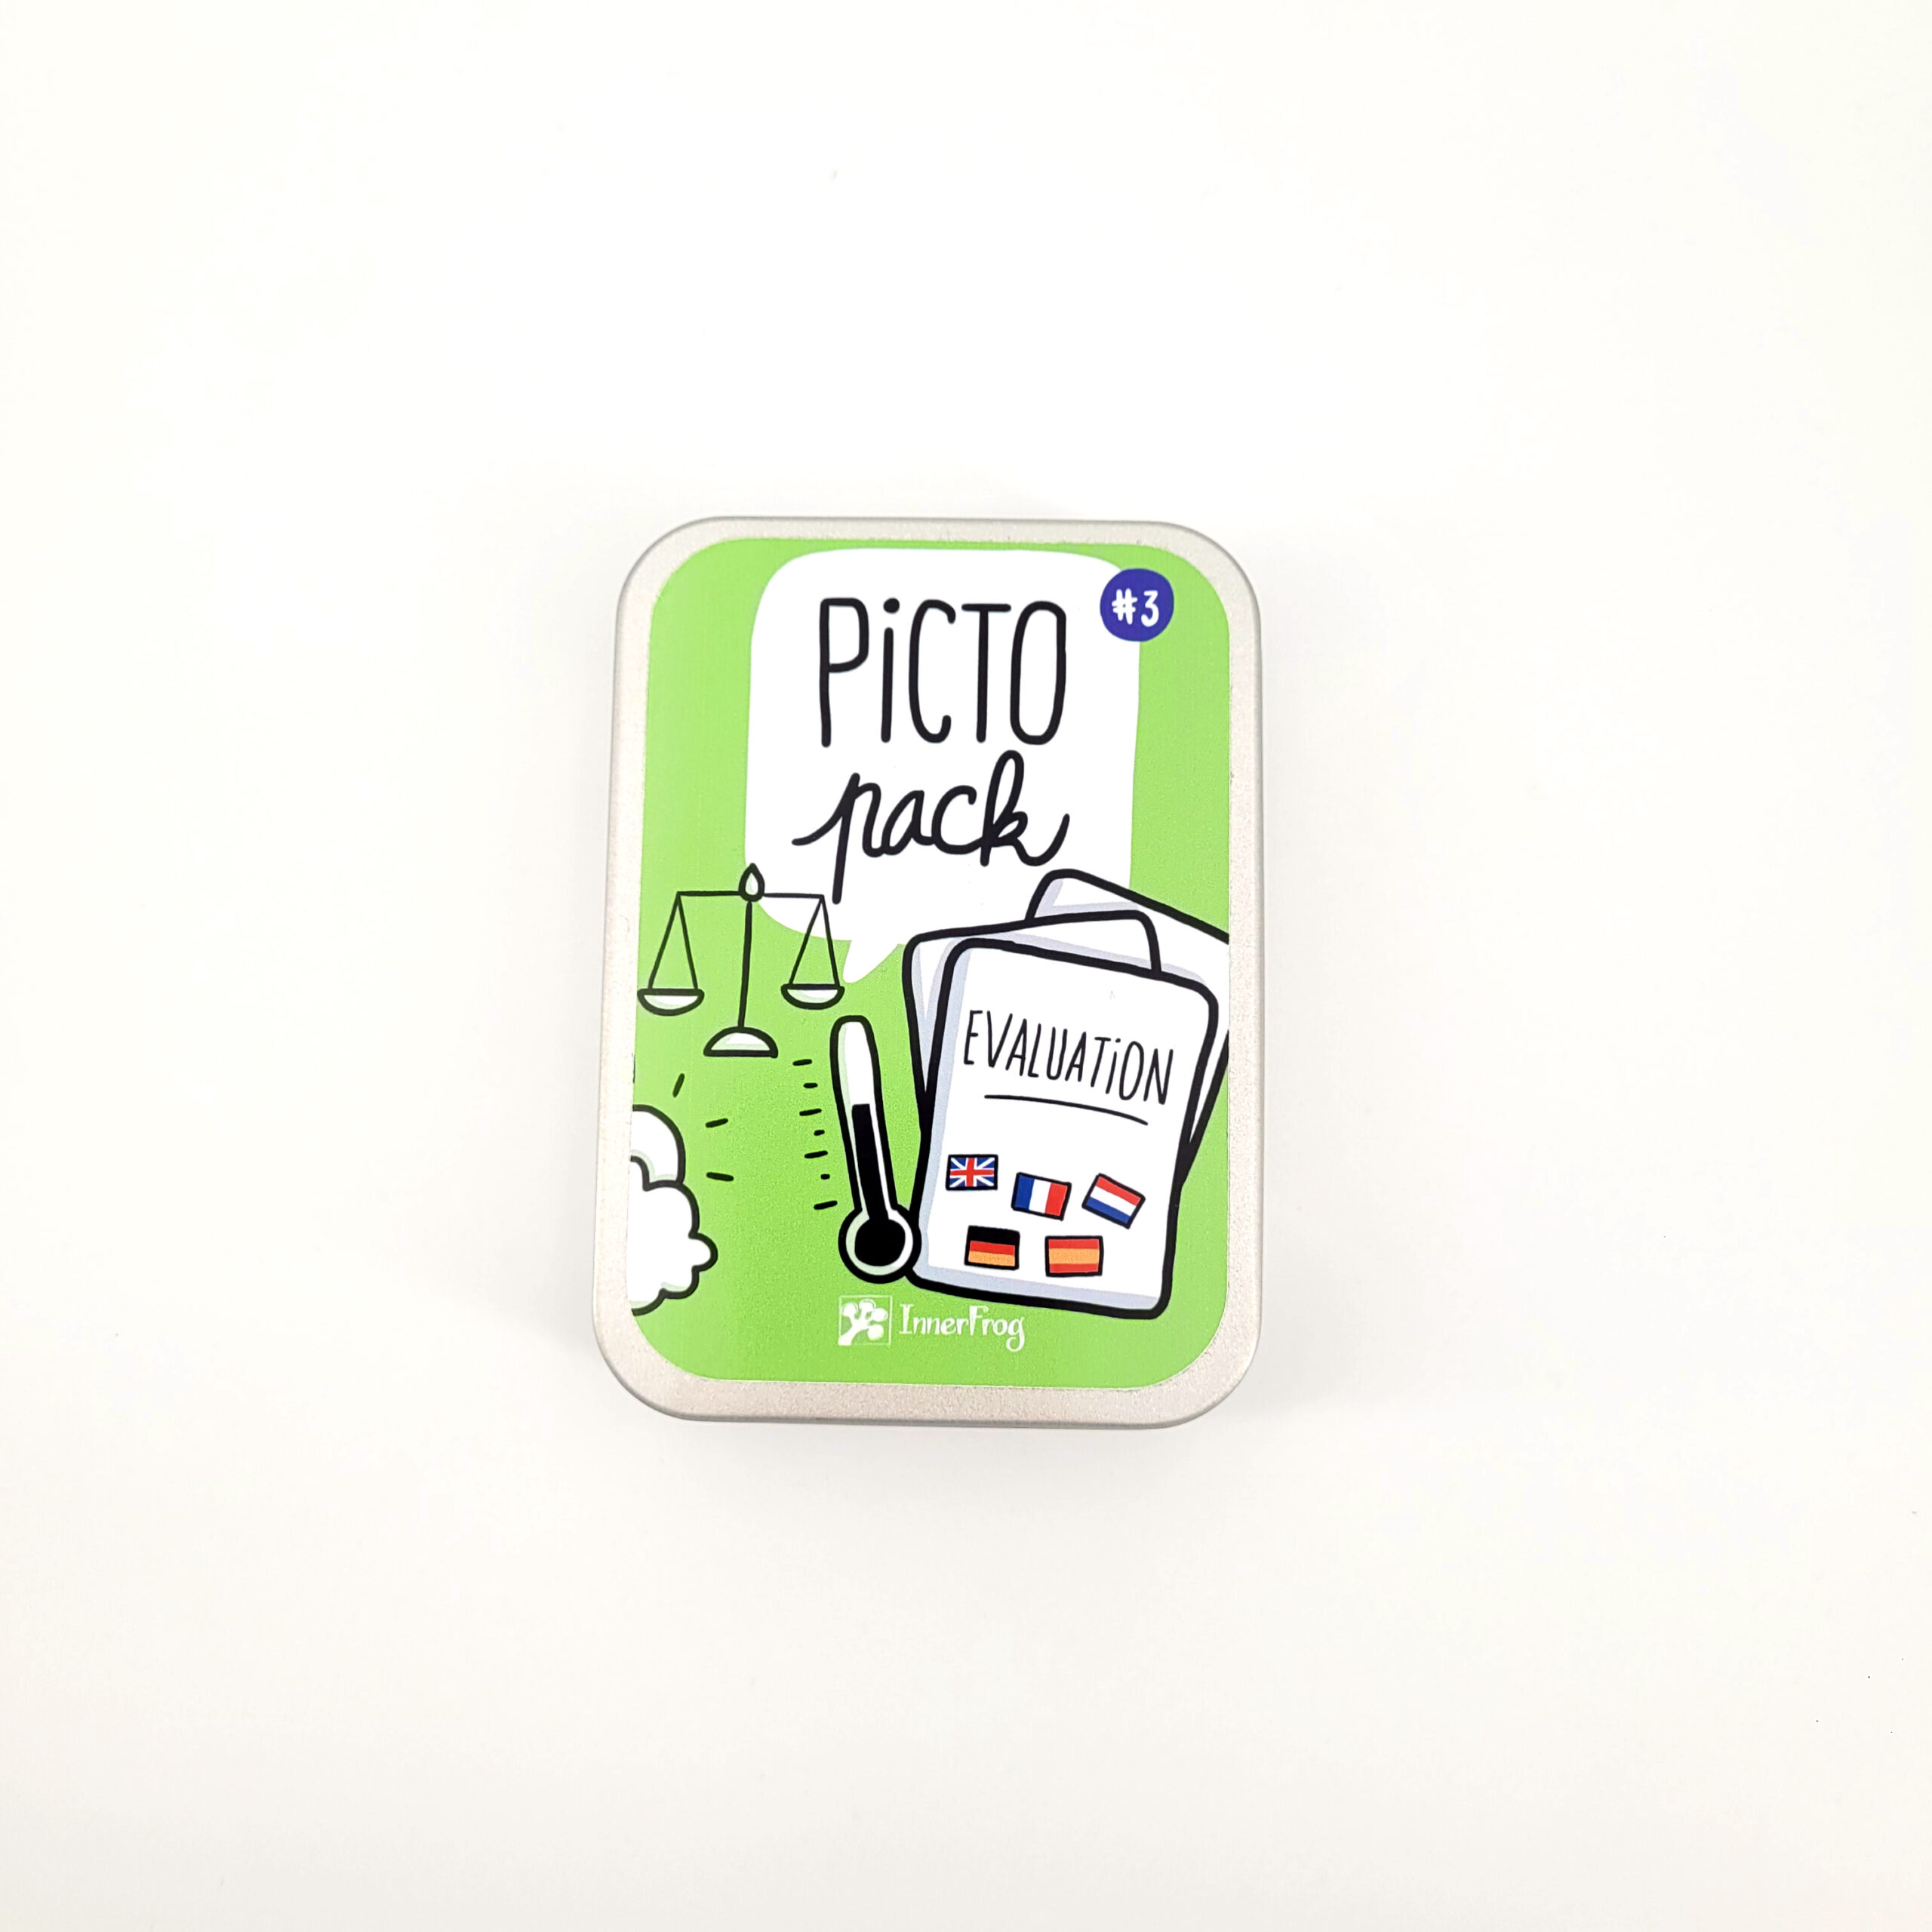 Picto Pack 3 - Evaluation 8